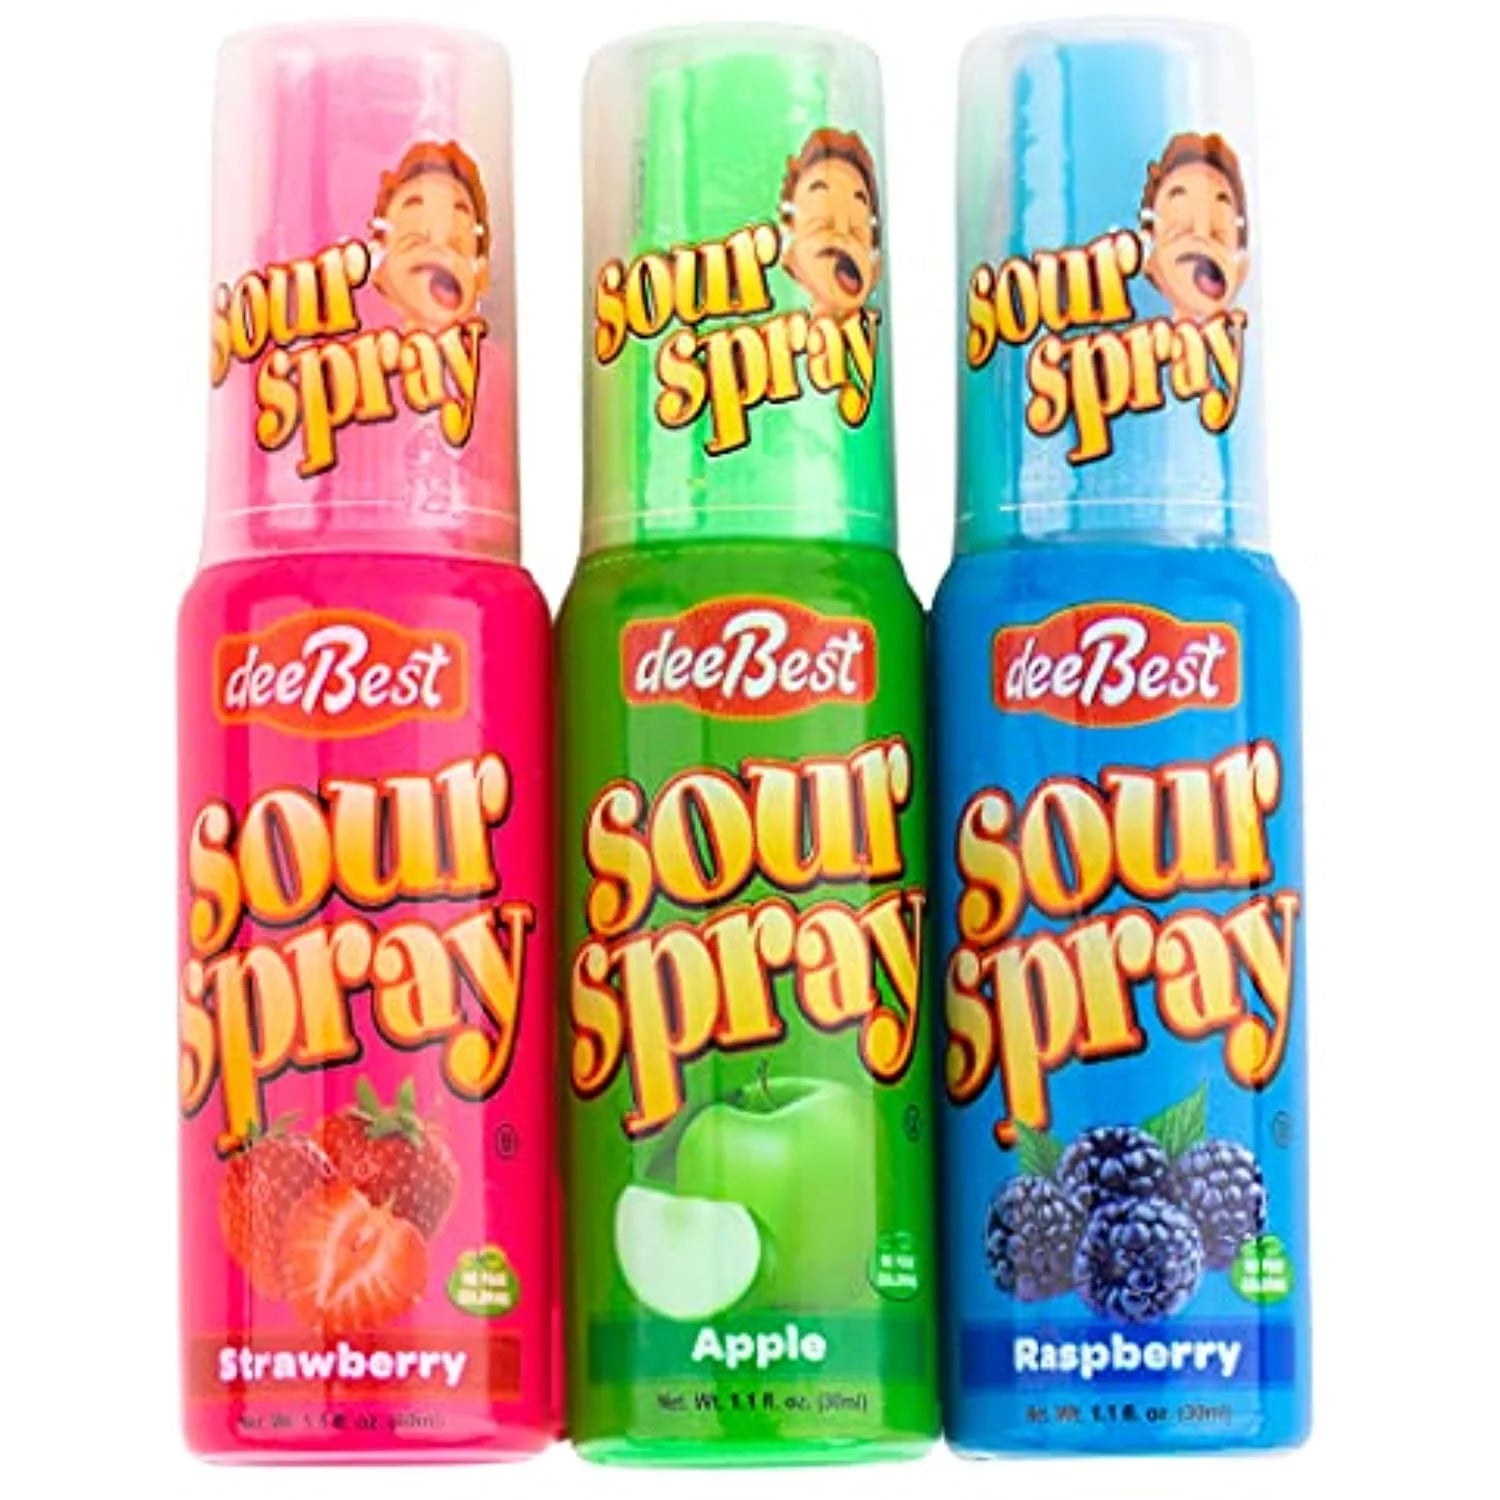 DeeBest Sour Spray Candy Apple - Sparty Girl